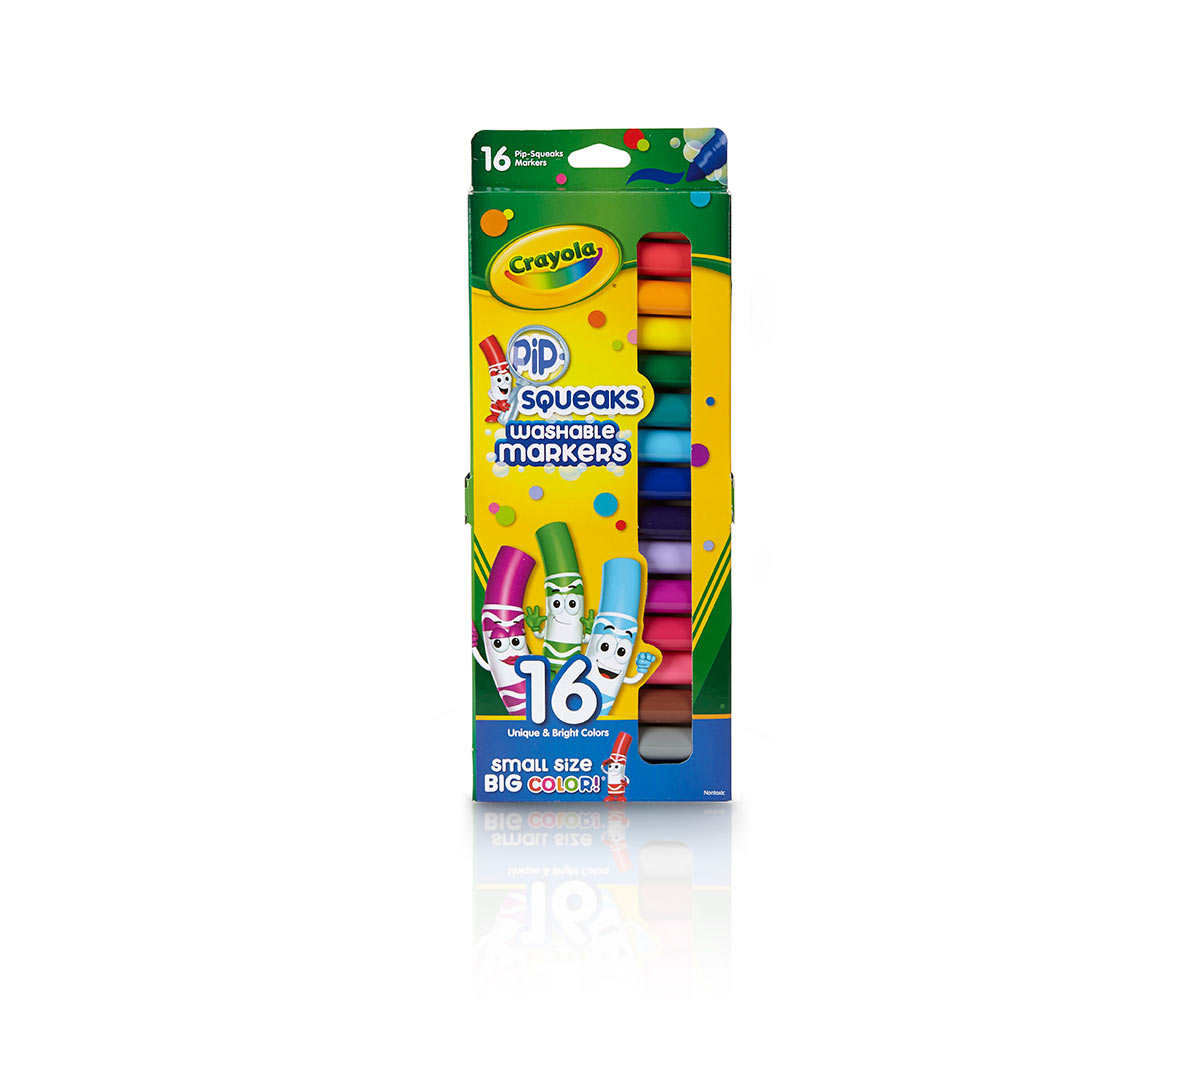  Crayola Pip Squeaks Marker Set, 50 Washable Markers, Gift for  Kids : Toys & Games